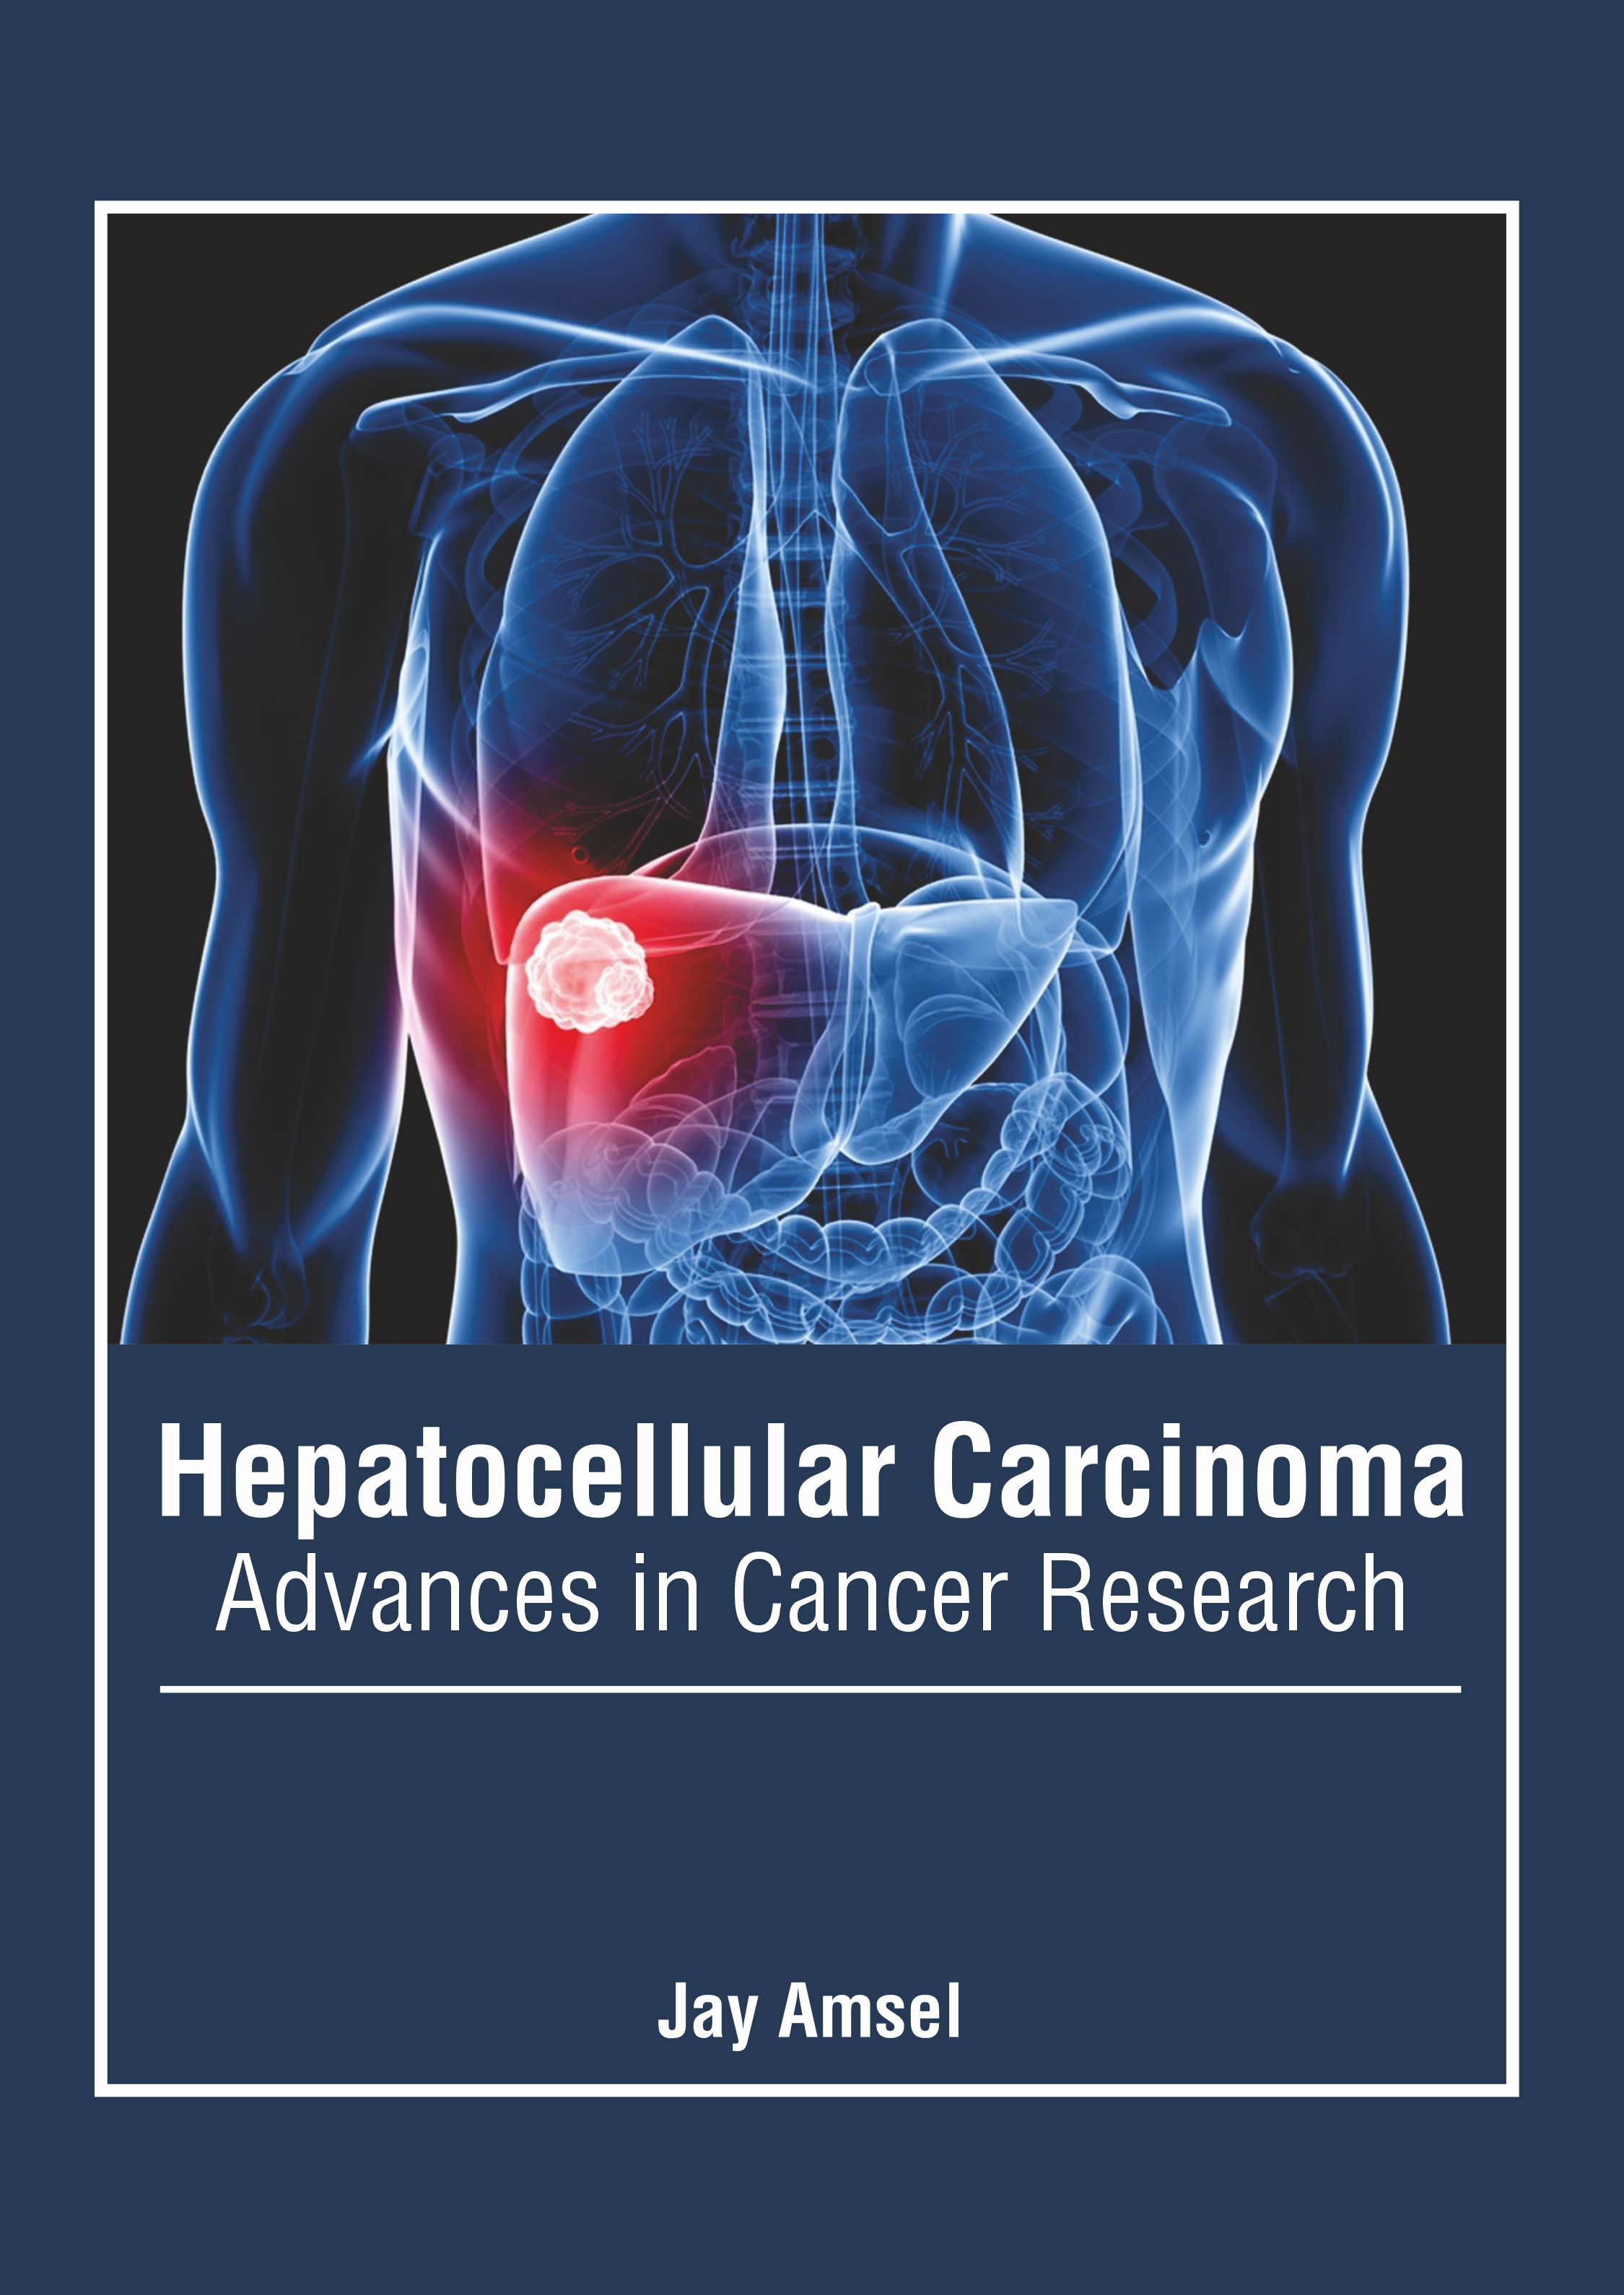 HEPATOCELLULAR CARCINOMA: ADVANCES IN CANCER RESEARCH